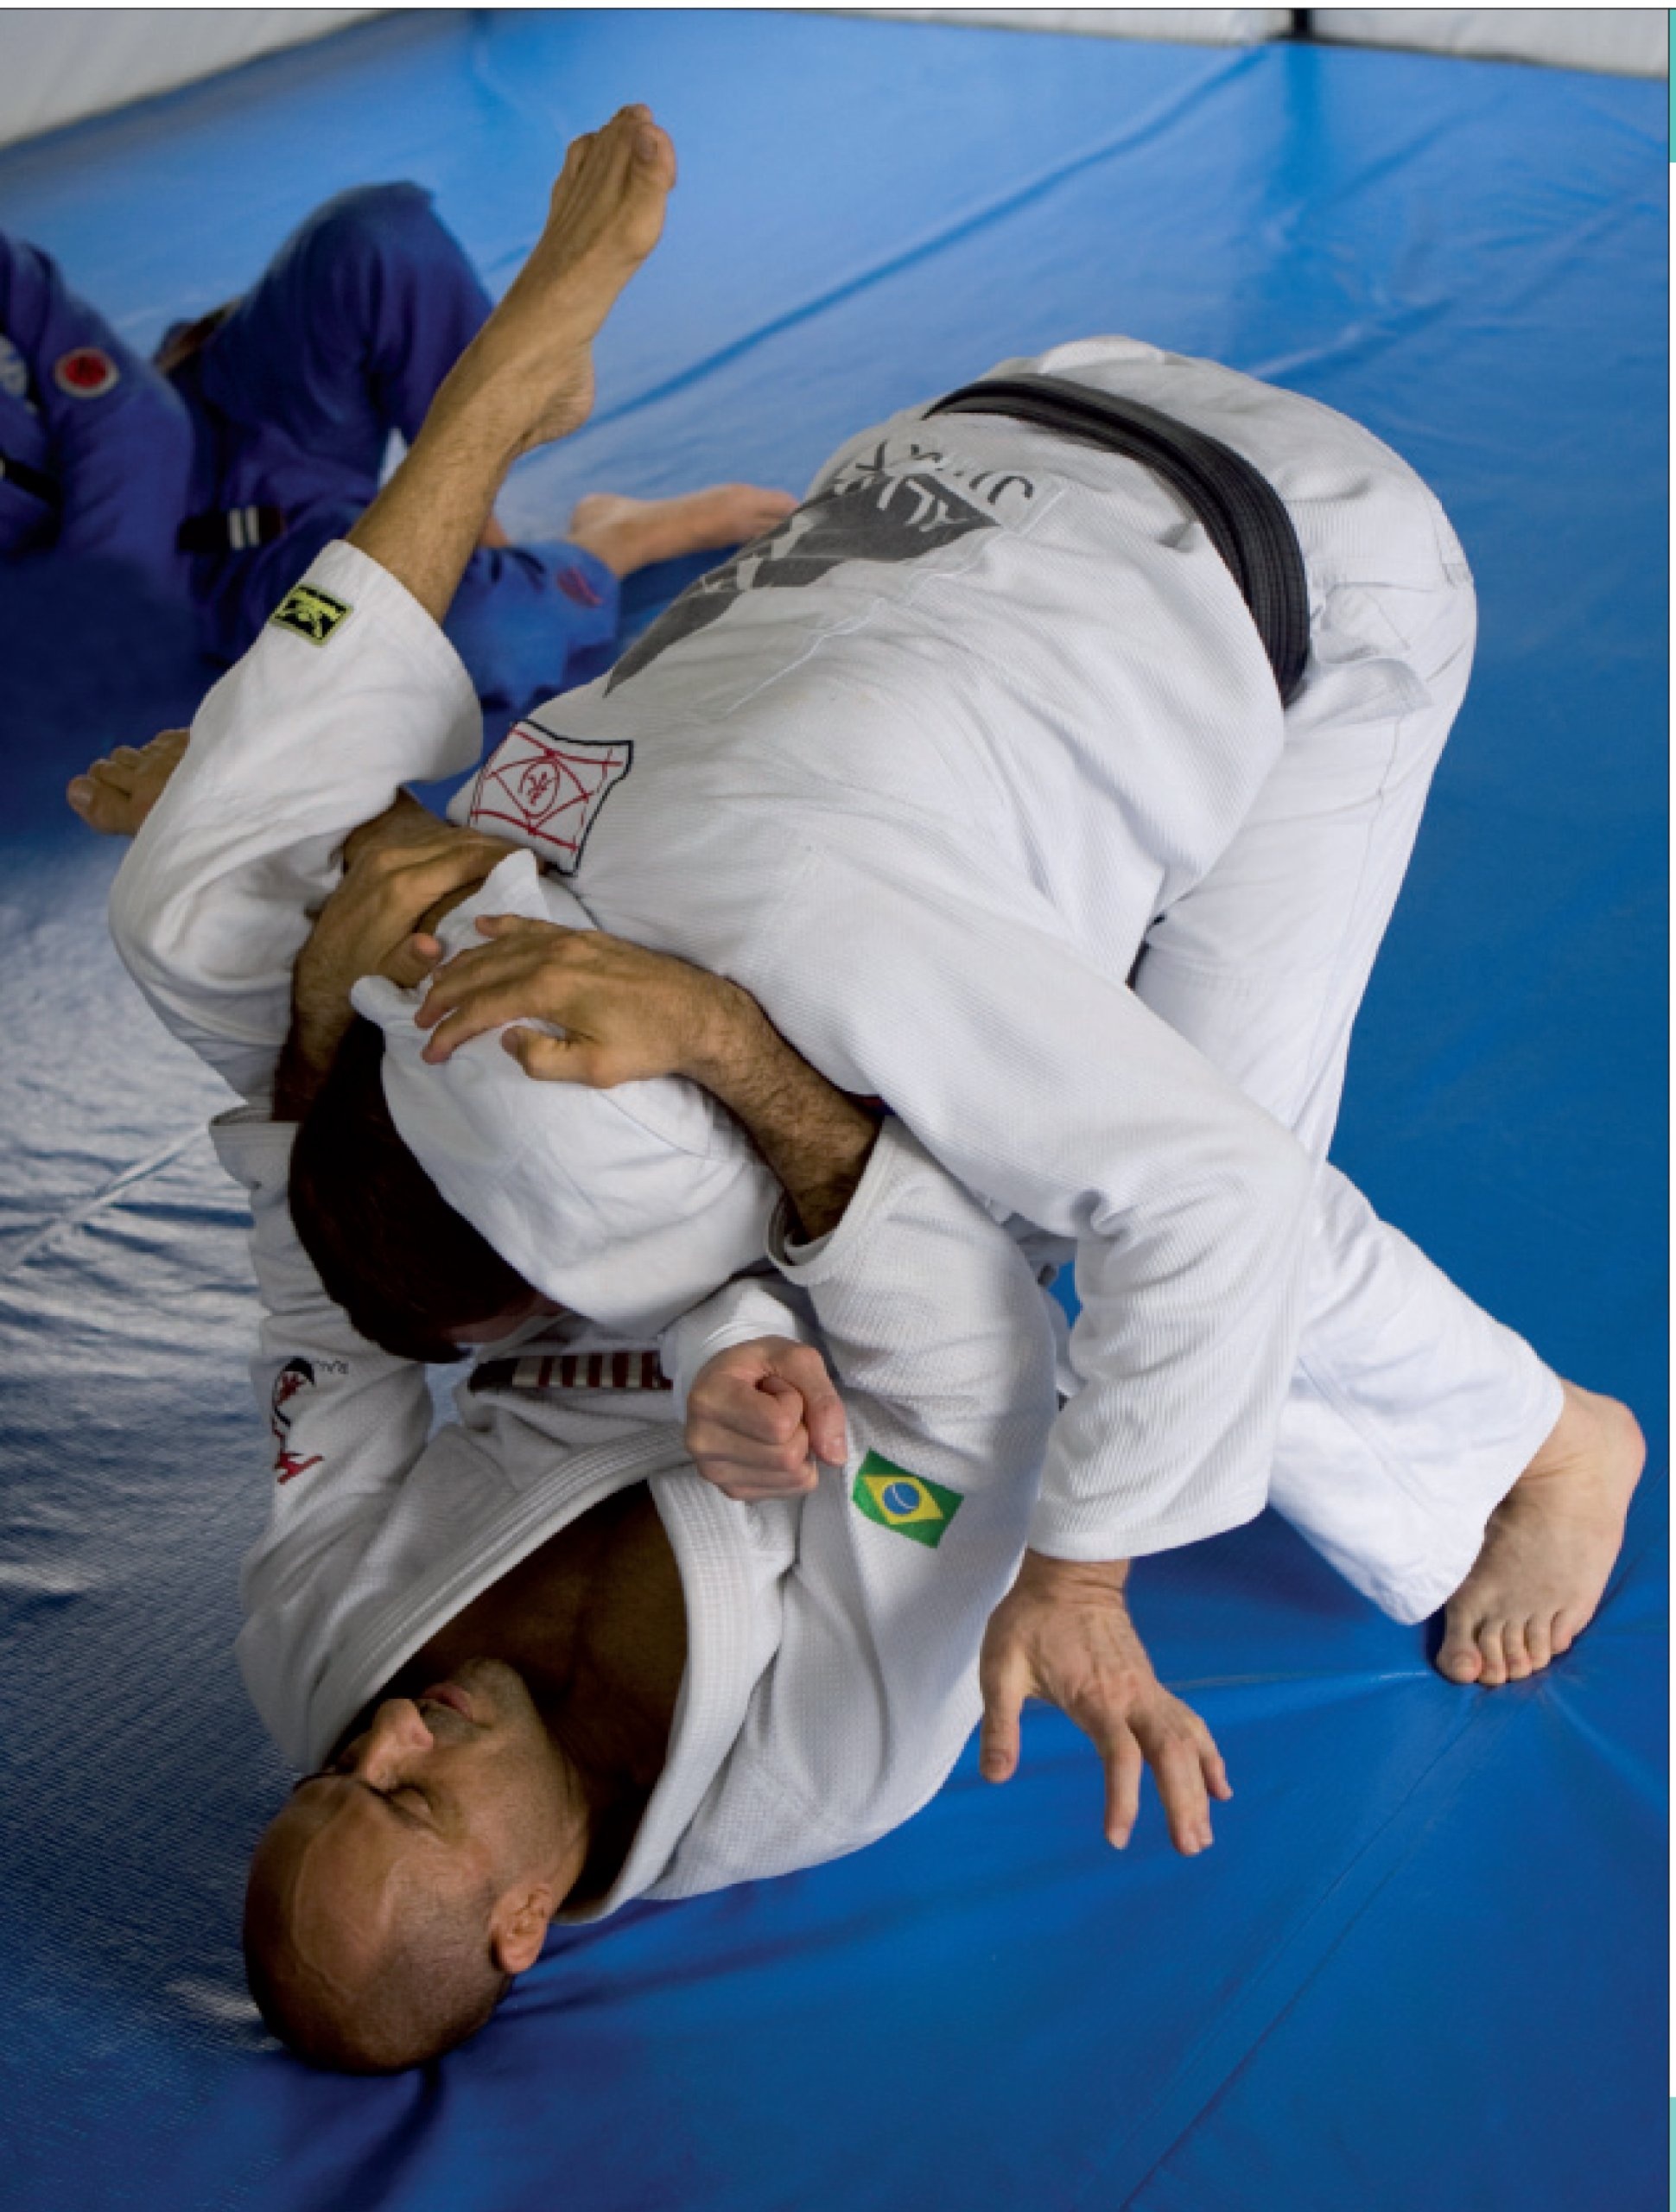 Brazilian Jiu-jitsu: Dominating in Mixed Martial Arts, Taking an opponent to the ground, Controlling an opponent, Using a number of techniques. 1940x2560 HD Wallpaper.